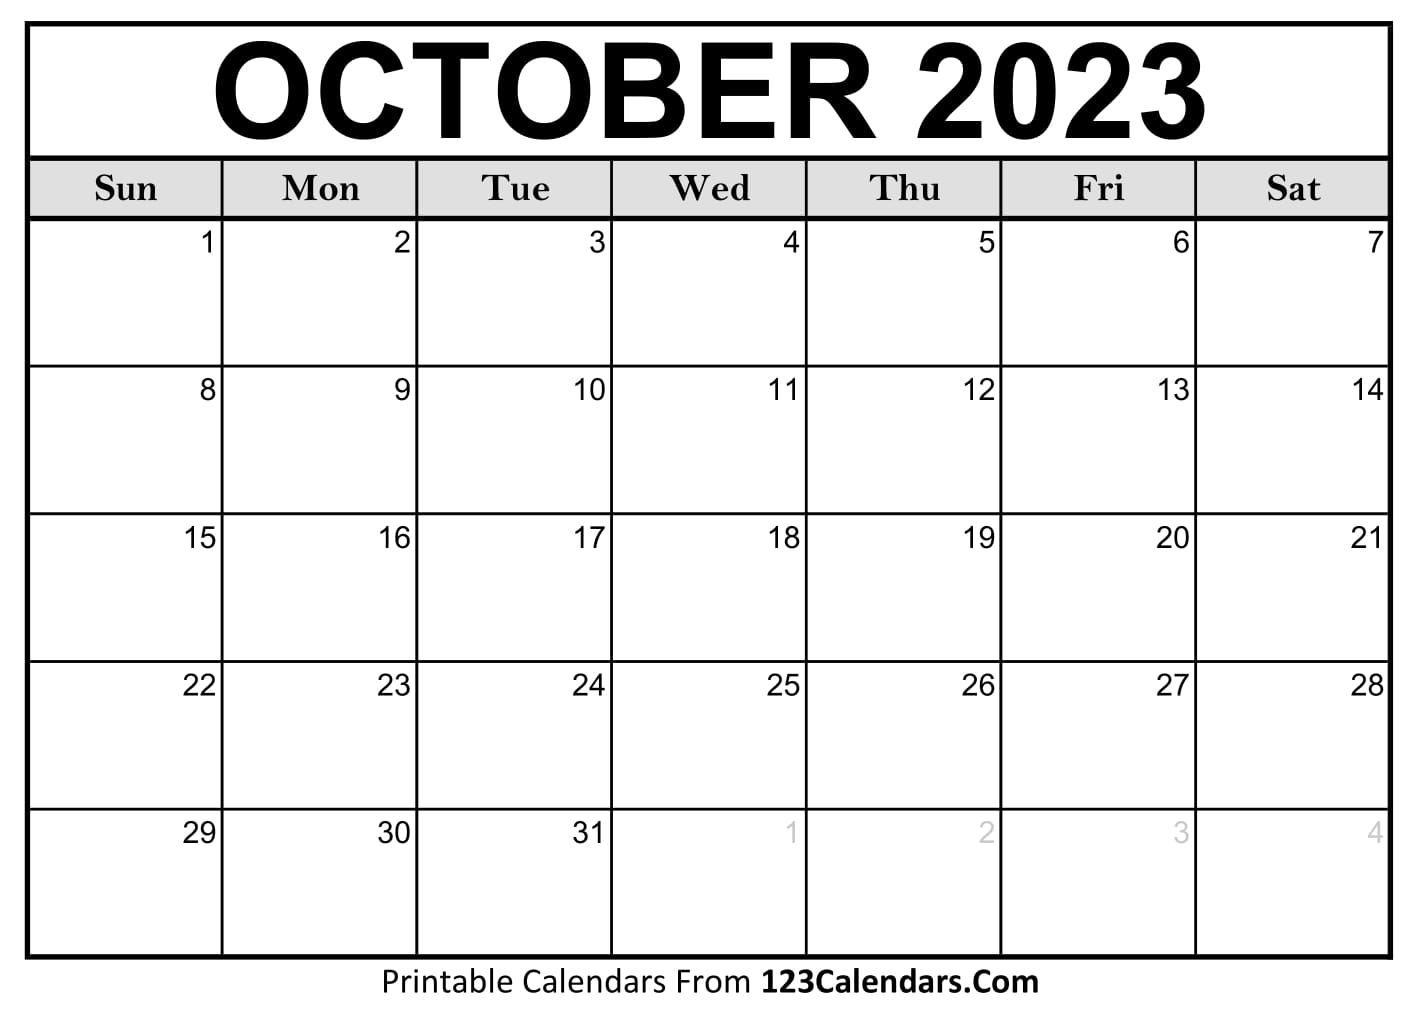 calendar-october-2023-uk-with-excel-word-and-pdf-templates